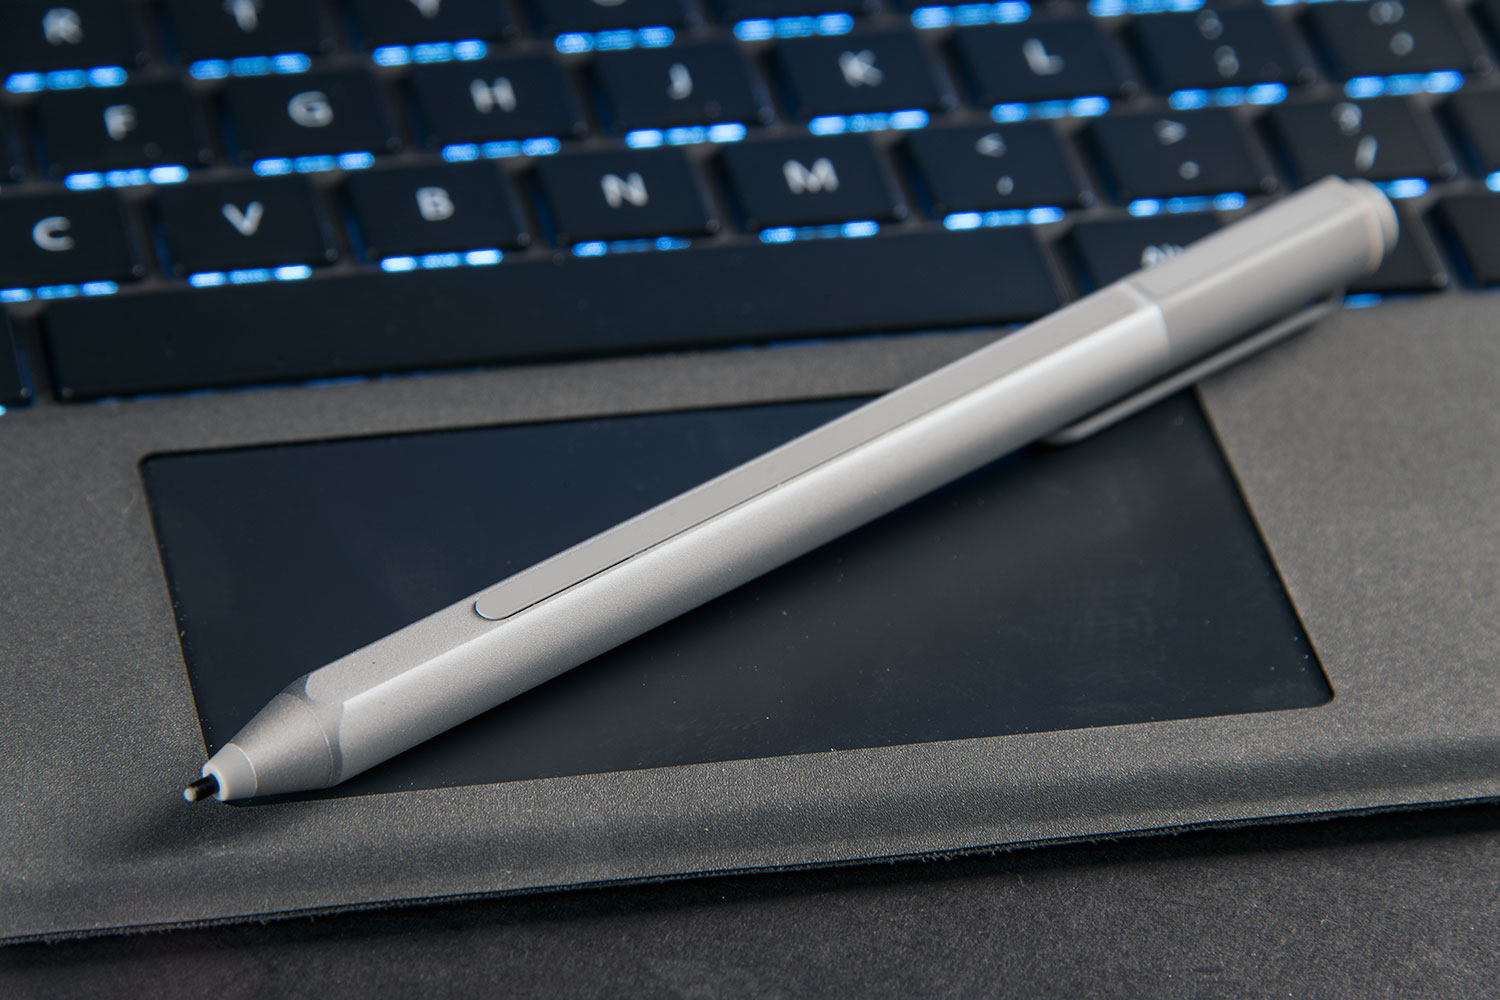 which-stylus-works-with-the-surface-rt